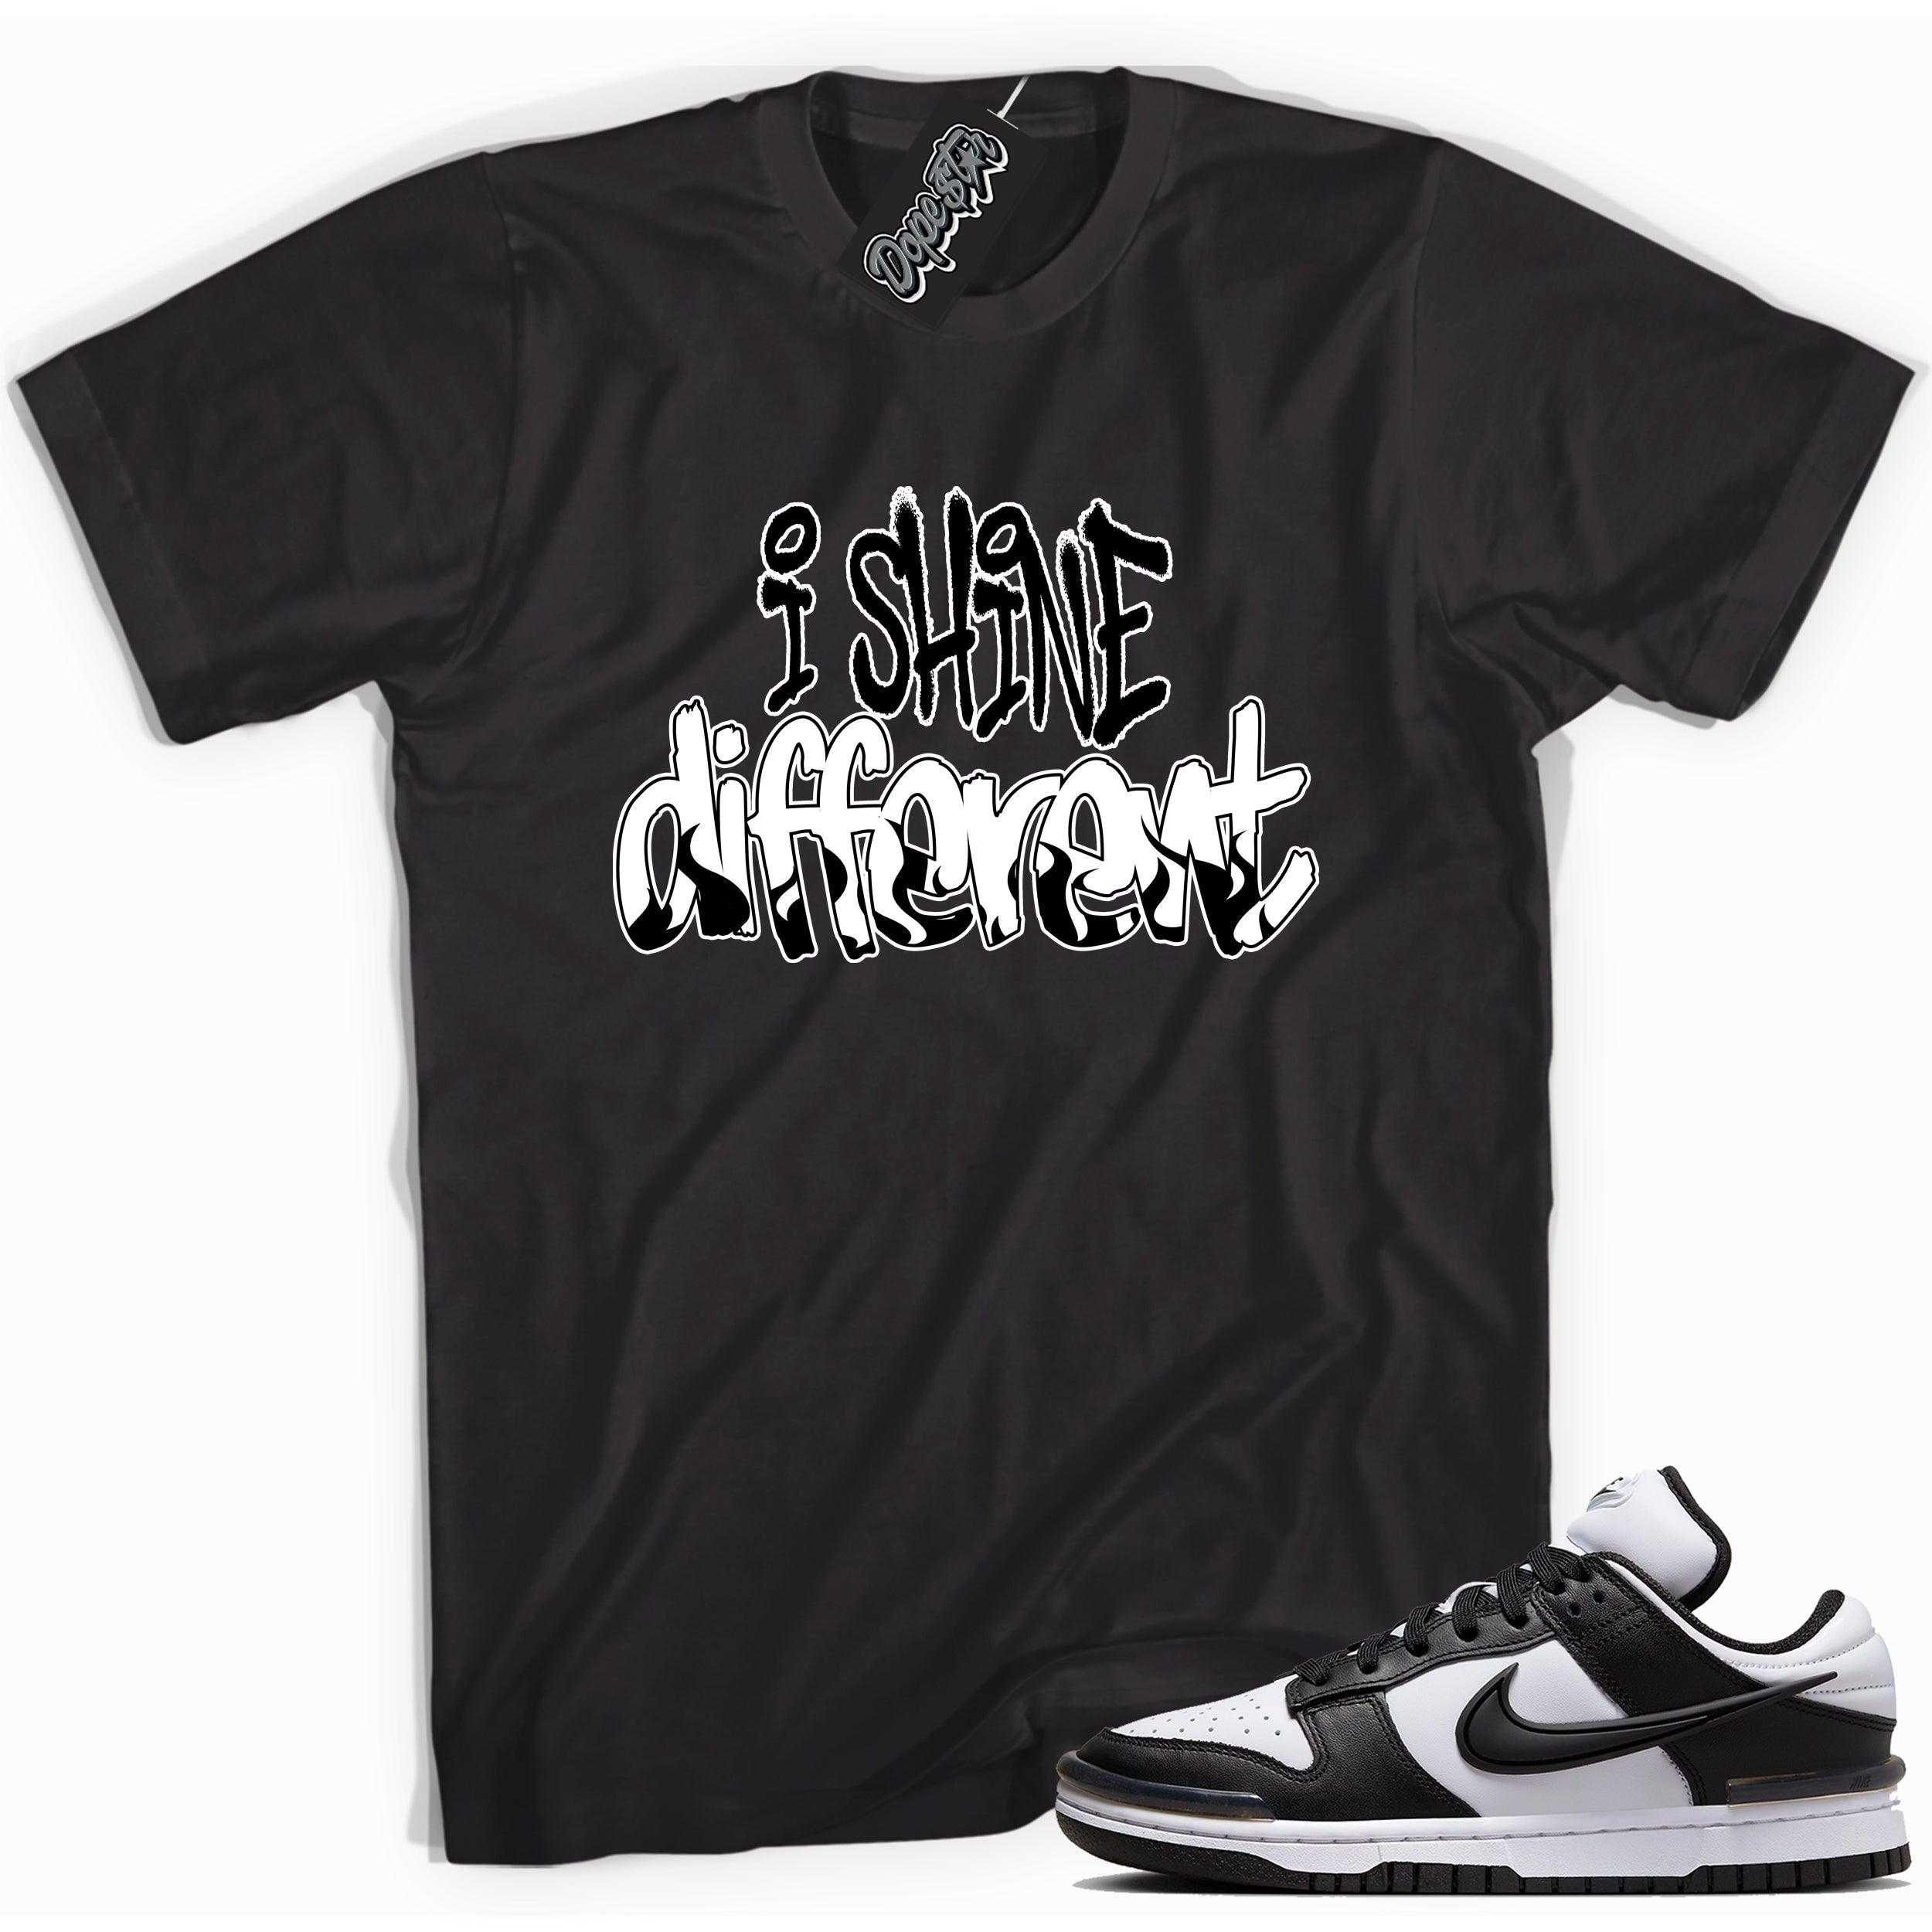 Cool black graphic tee with 'i shine different ' print, that perfectly matches Nike Dunk Low Twist Panda sneakers.